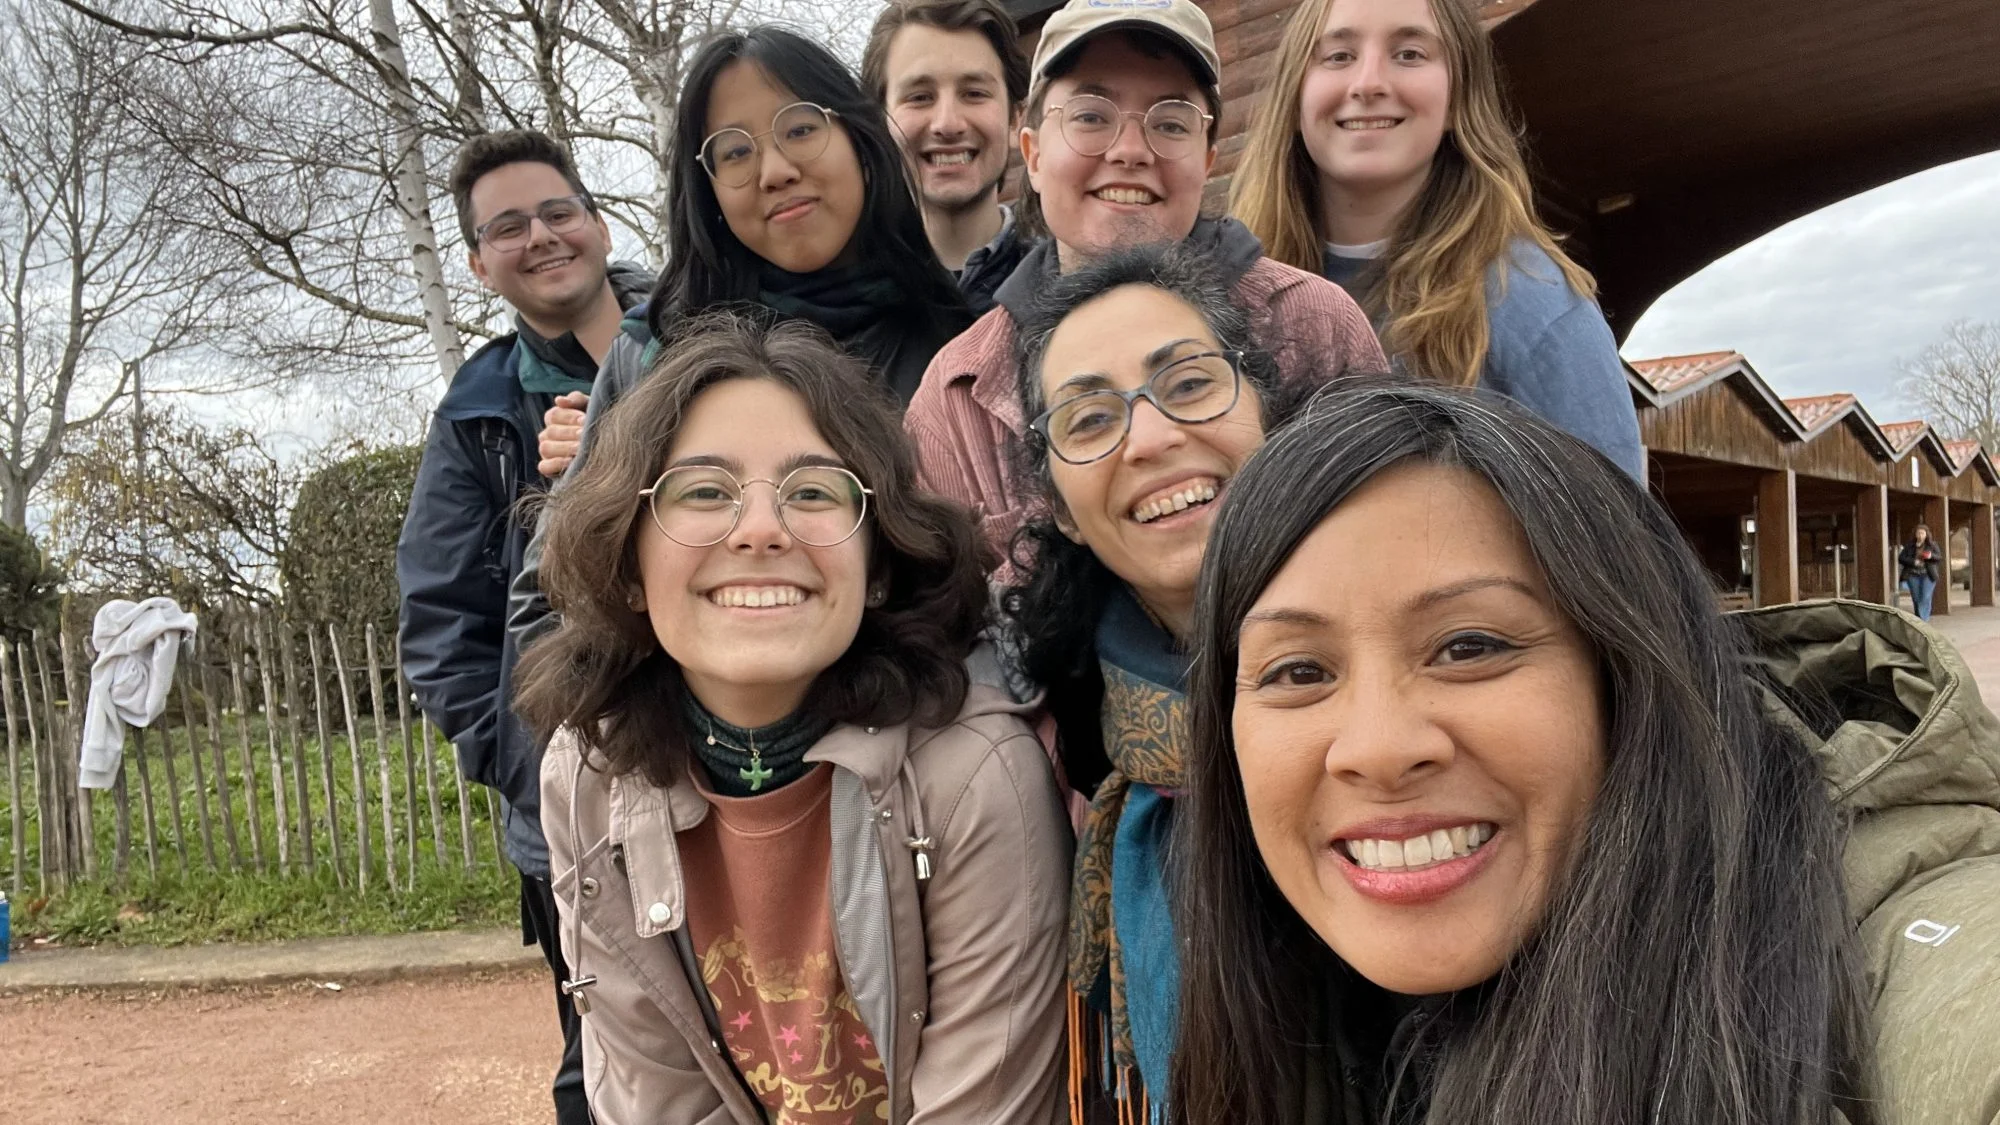 A group of students smiles in a selfie. They are outside and wearing jackets and hats.